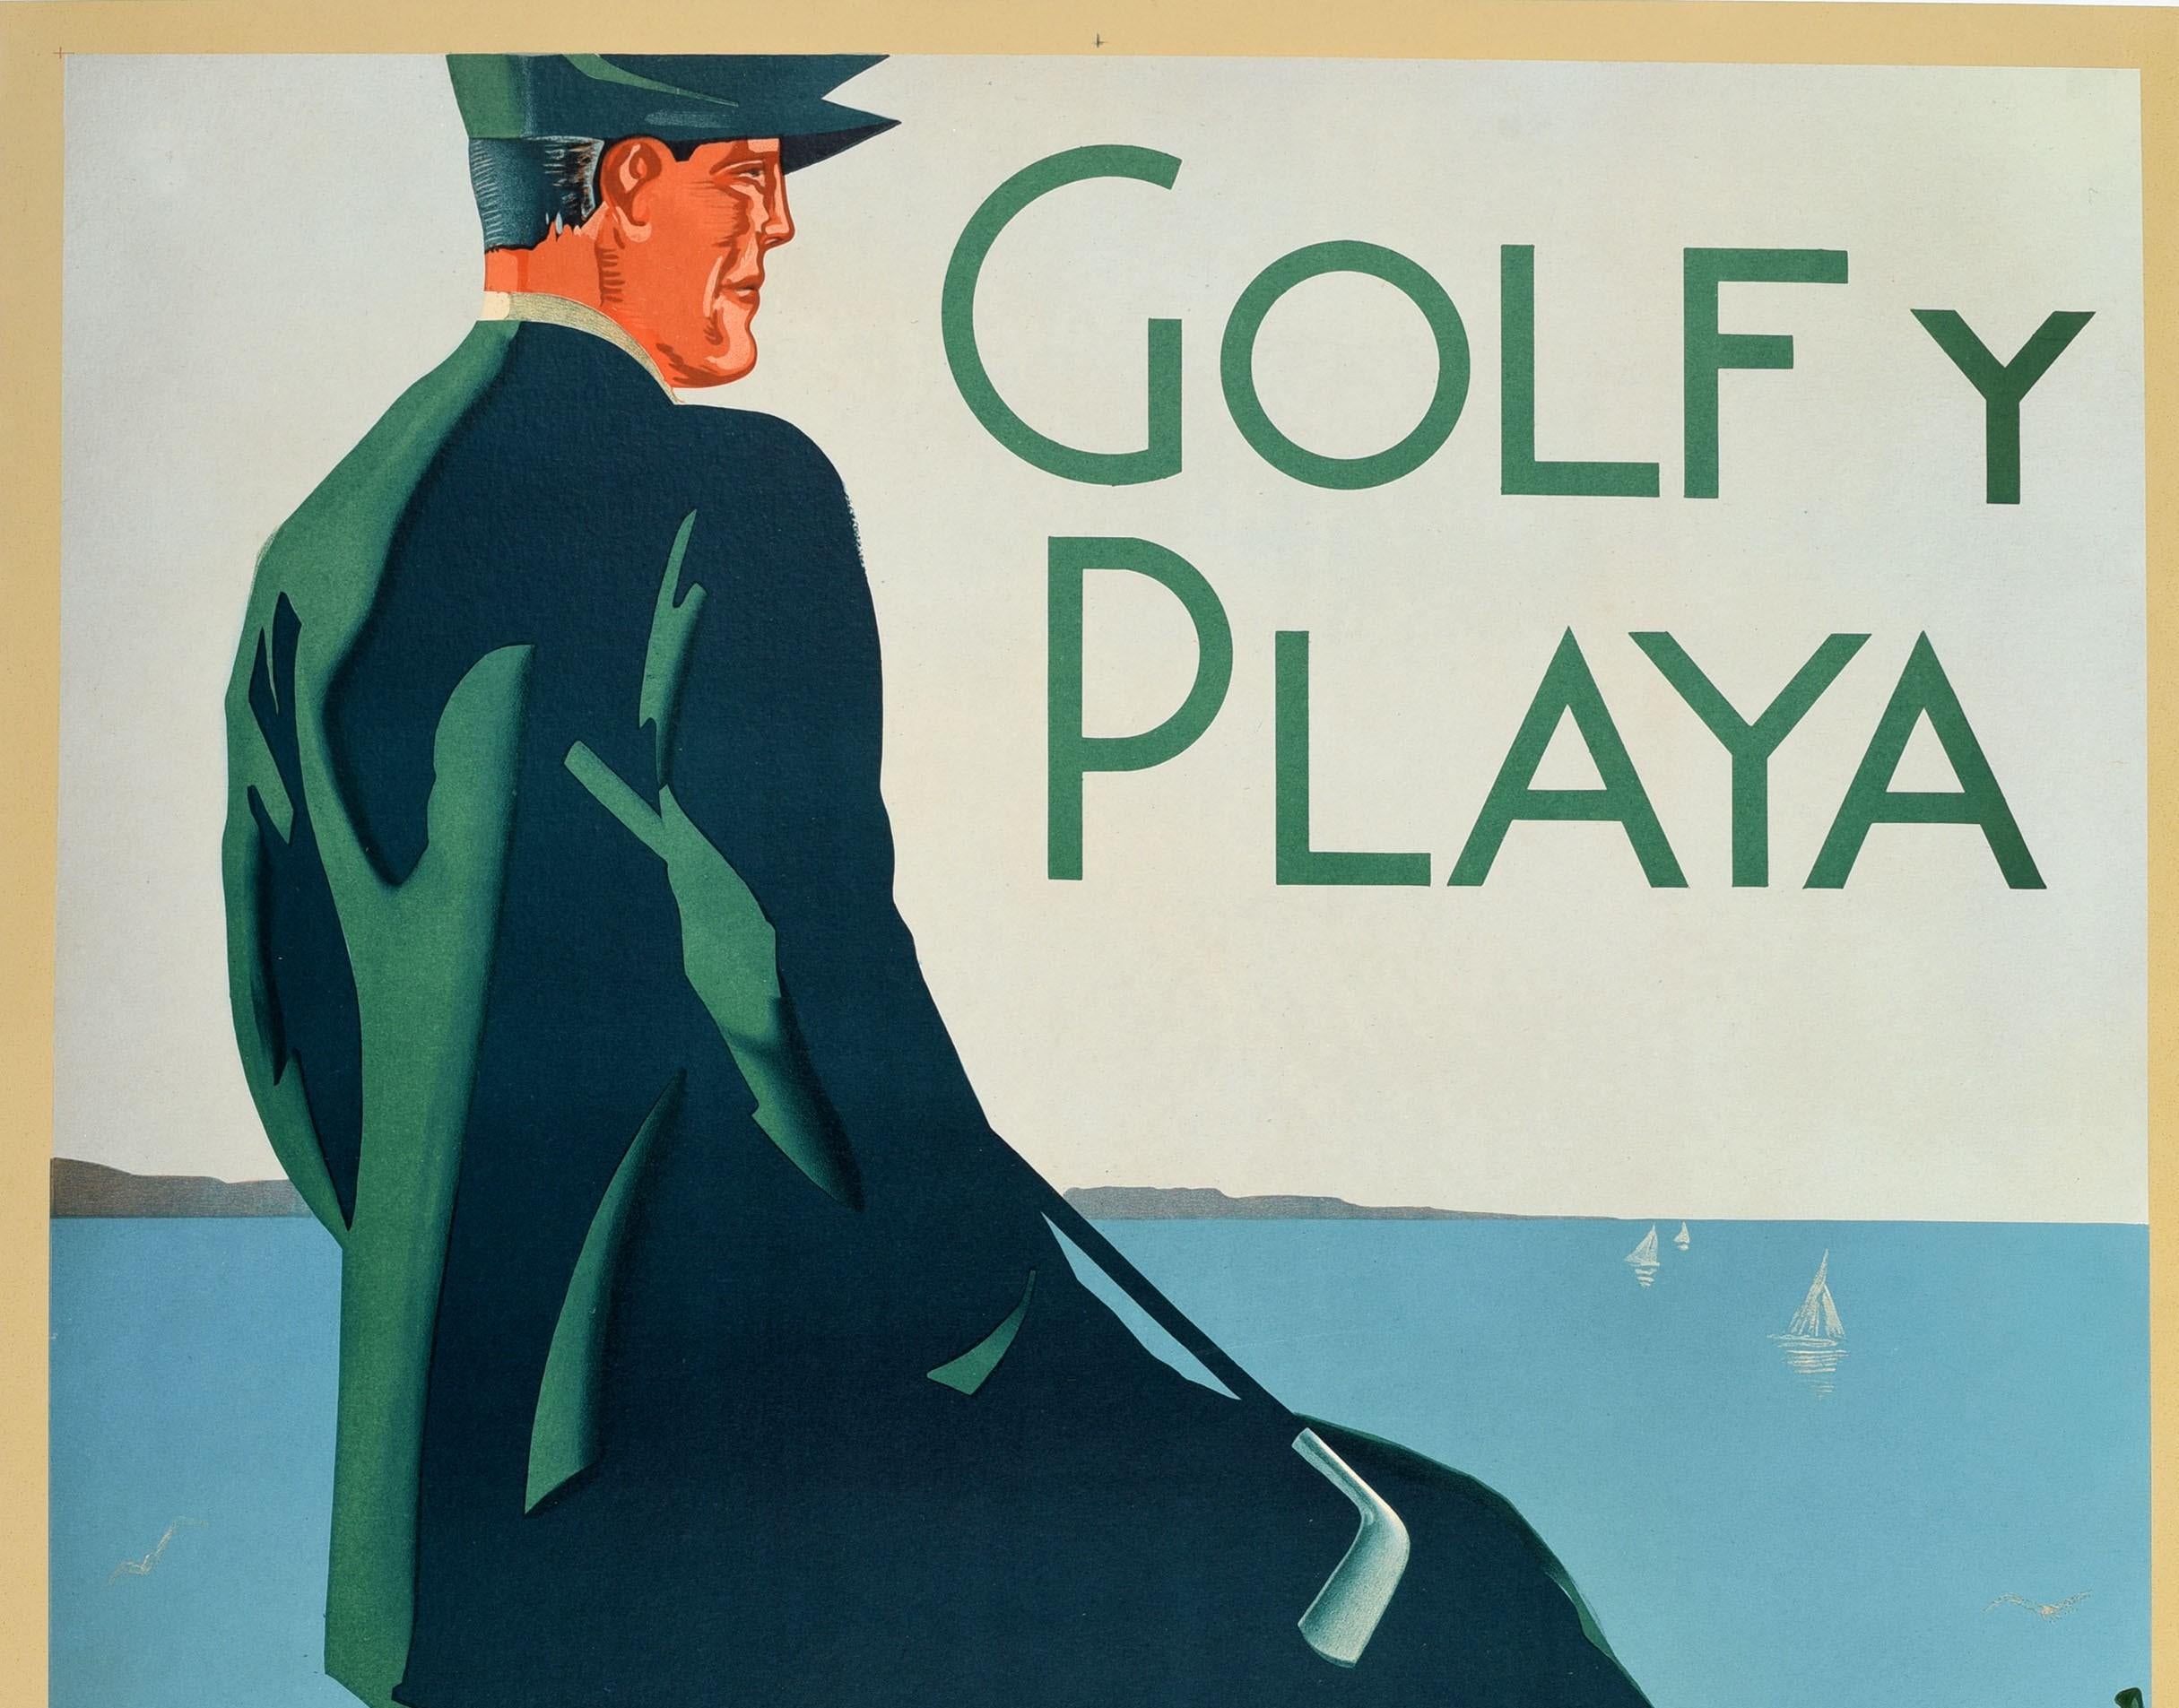 Original vintage travel poster - Golf and Beach Miramar / Golf y Playa Miramar - featuring a stunning Art Deco design depicting a golf player holding a golf club and looking over the view of the bay with sailing boats at sea and hills in the